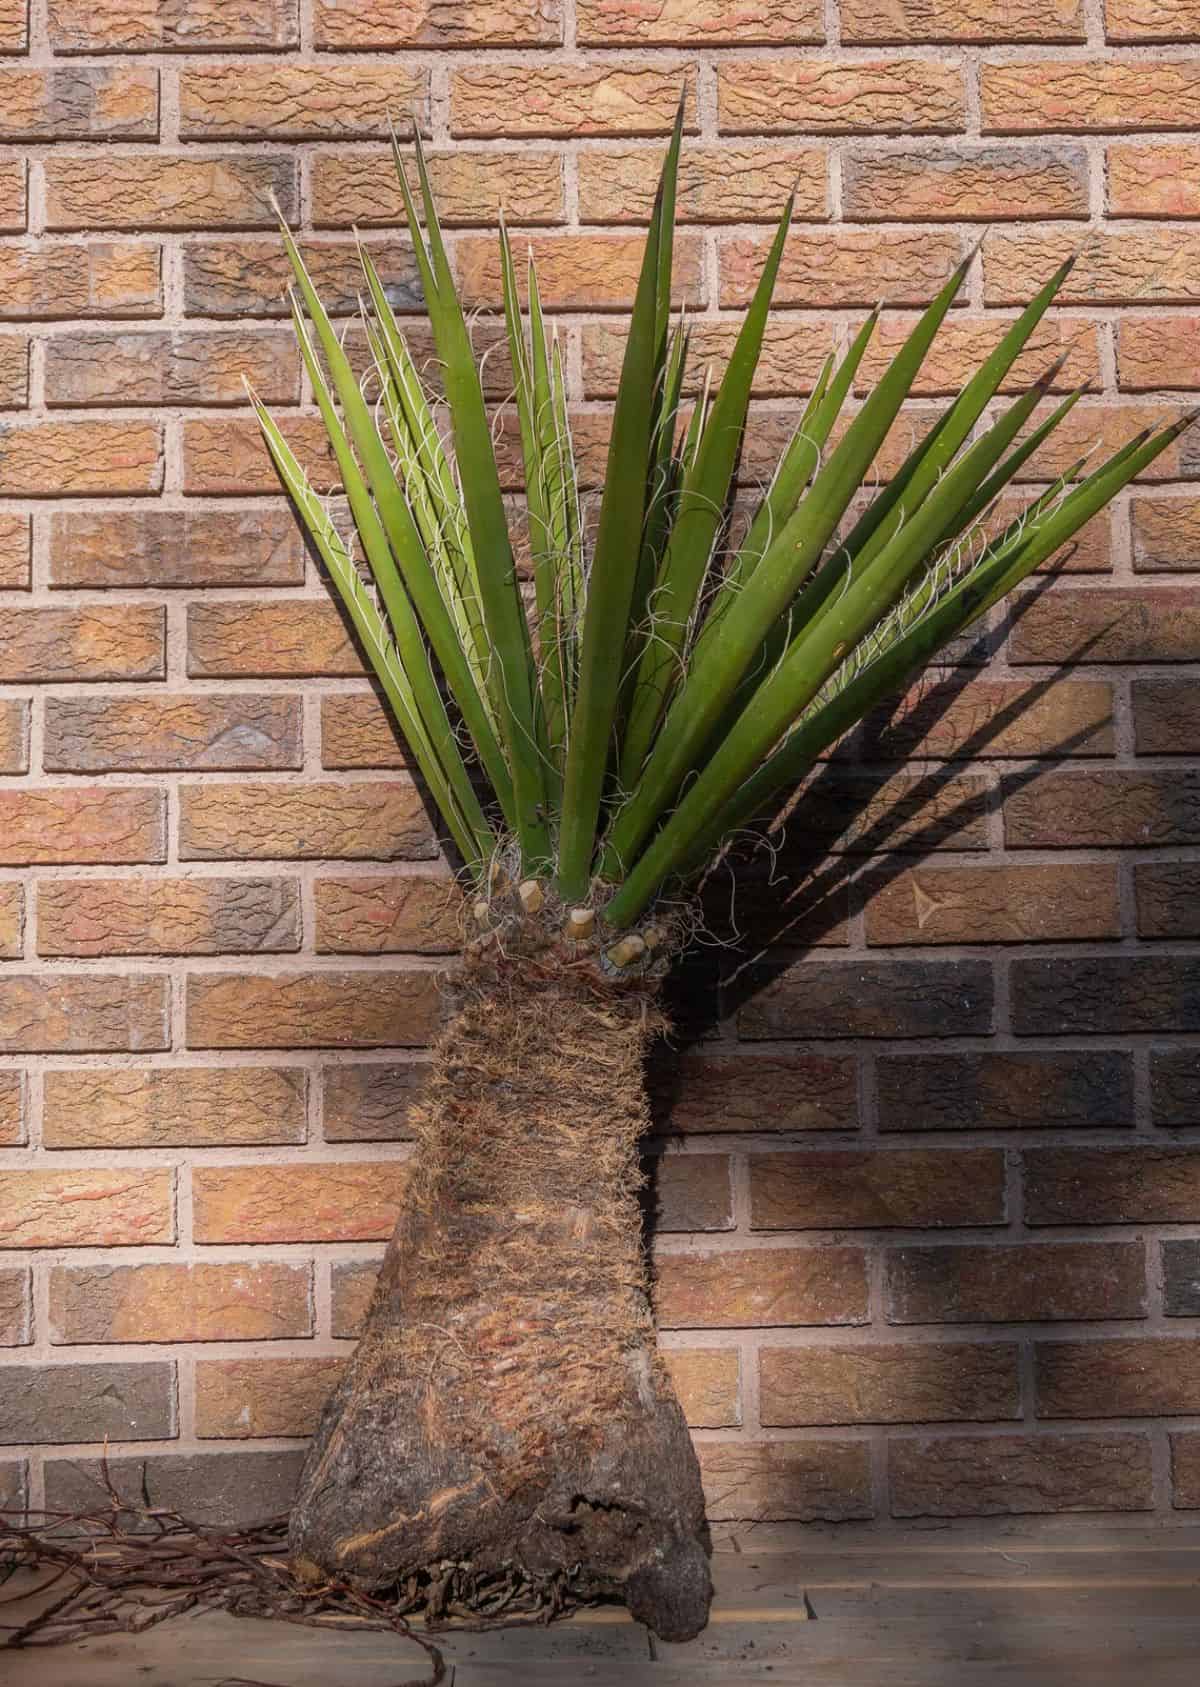 Mojave Yucca Plant leans on a wall.